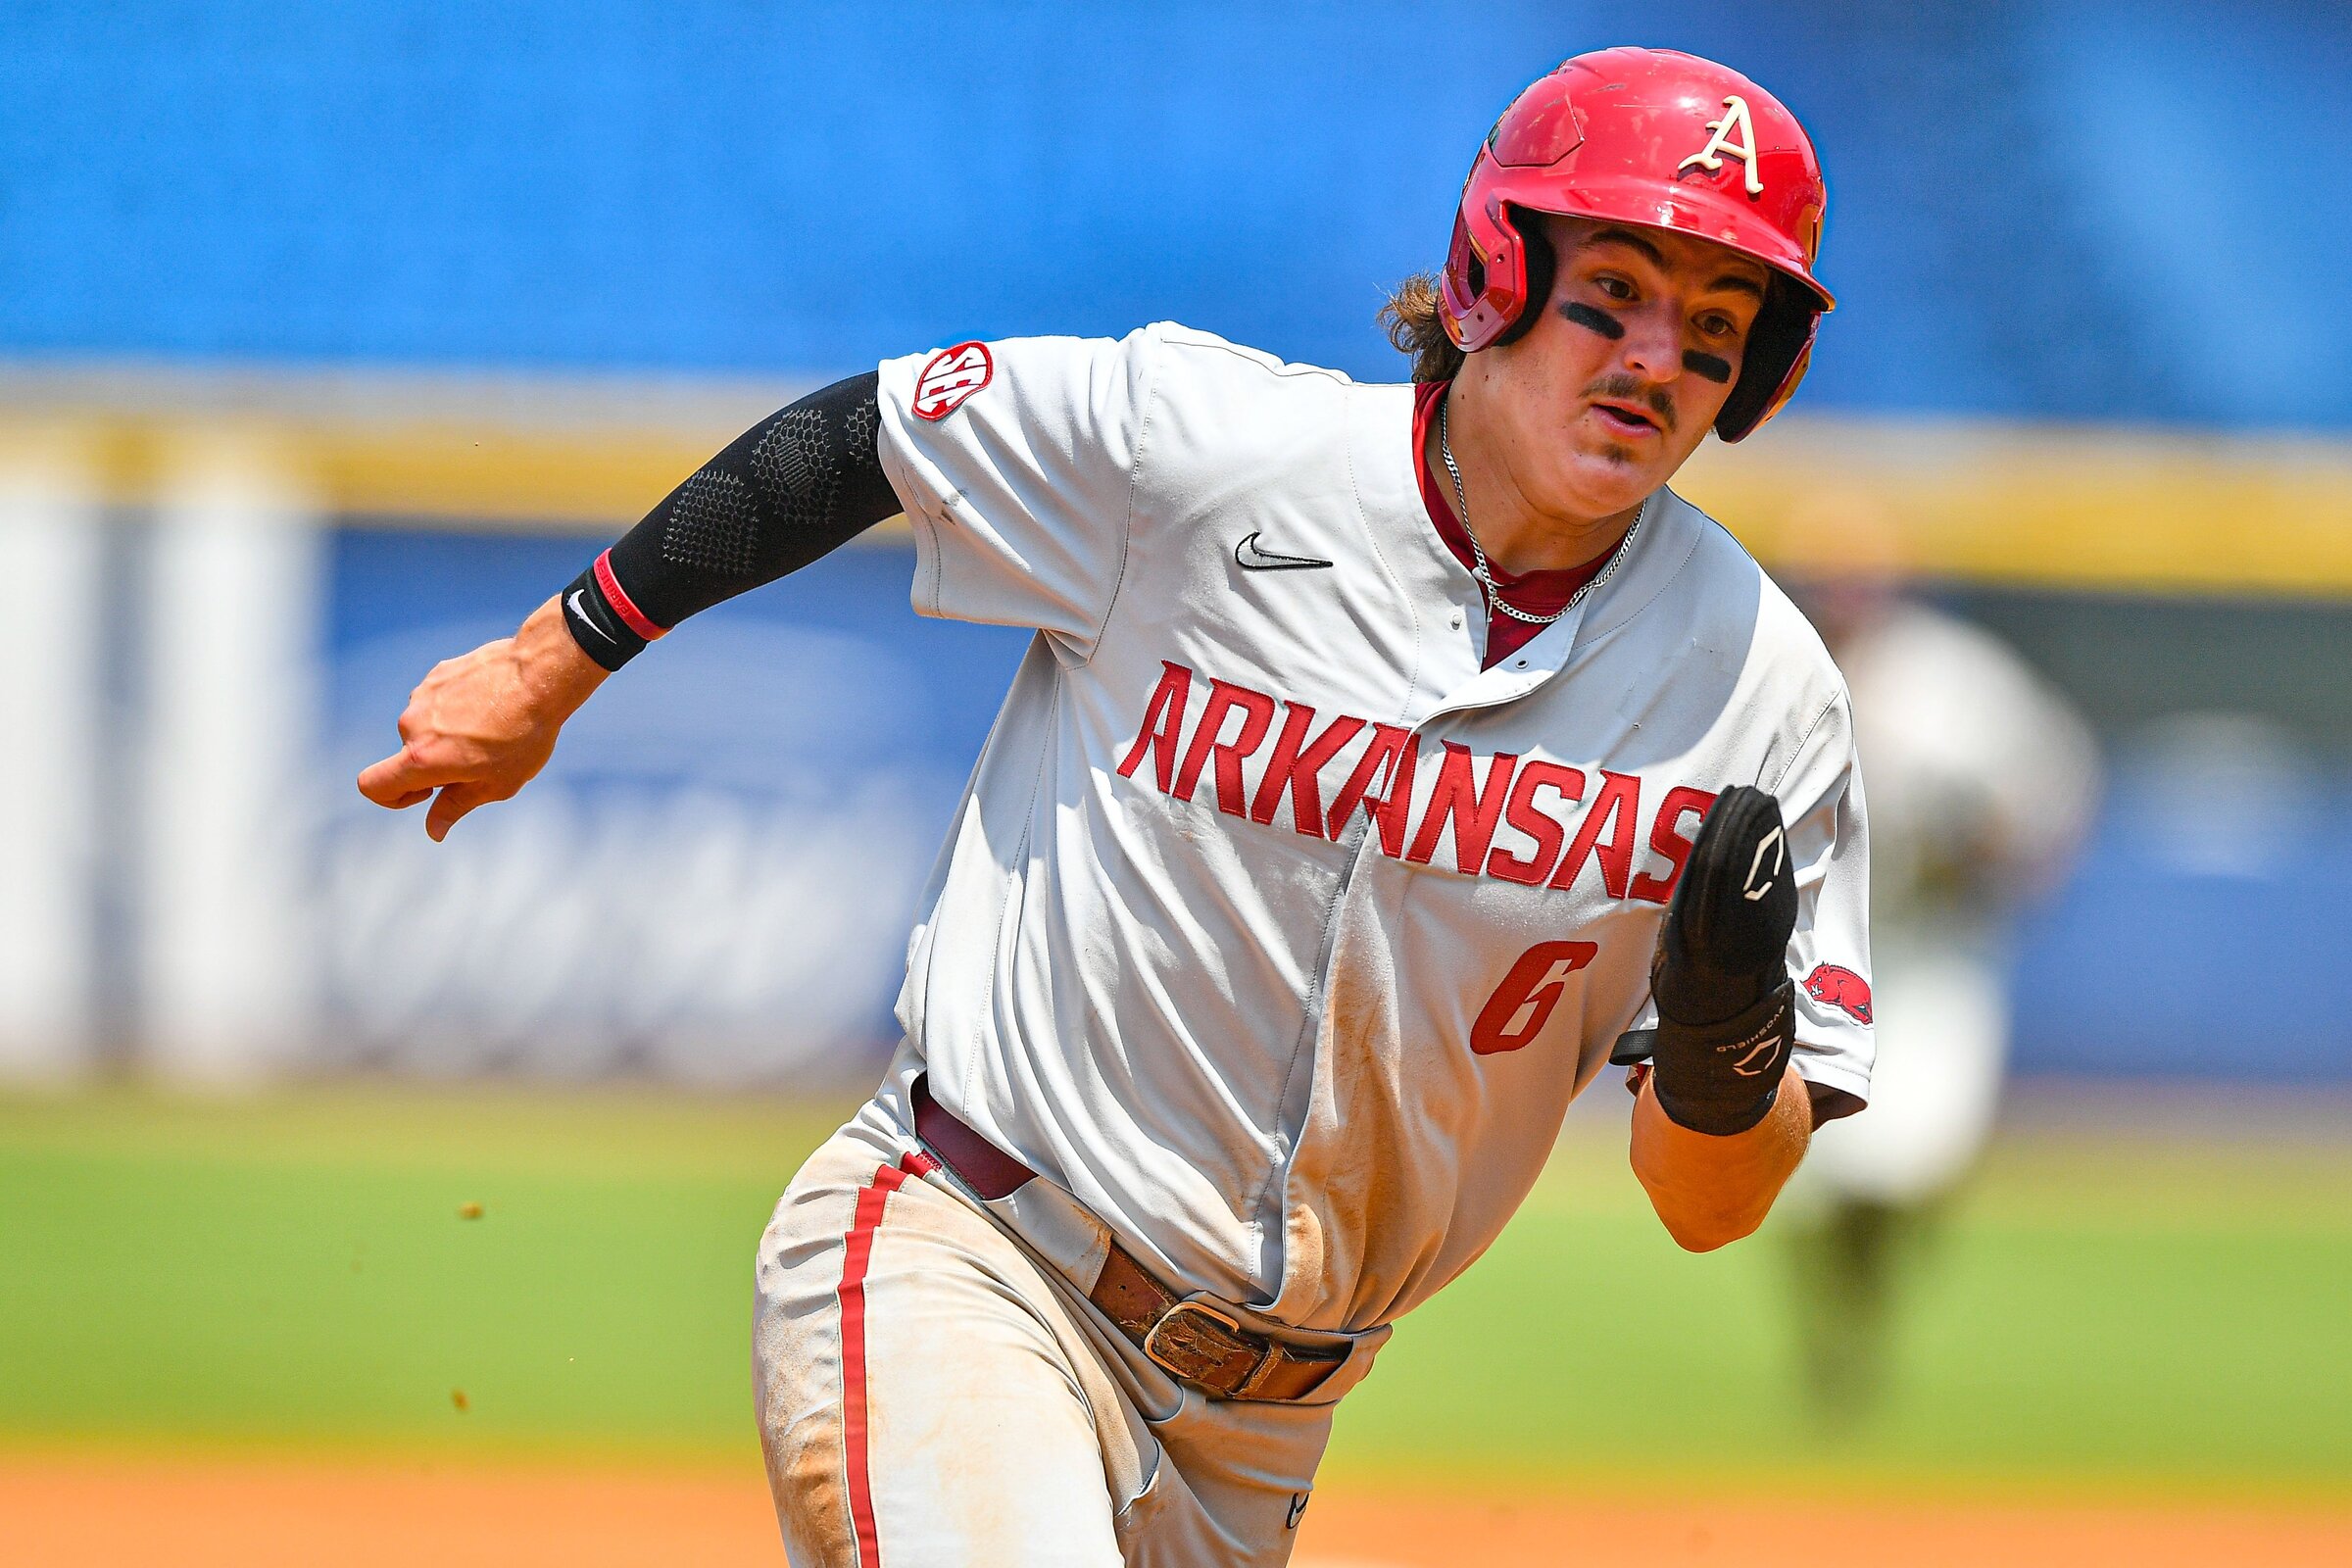 Red Sox Choose Arkansas Outfielder With 7th Pick In MLB Draft